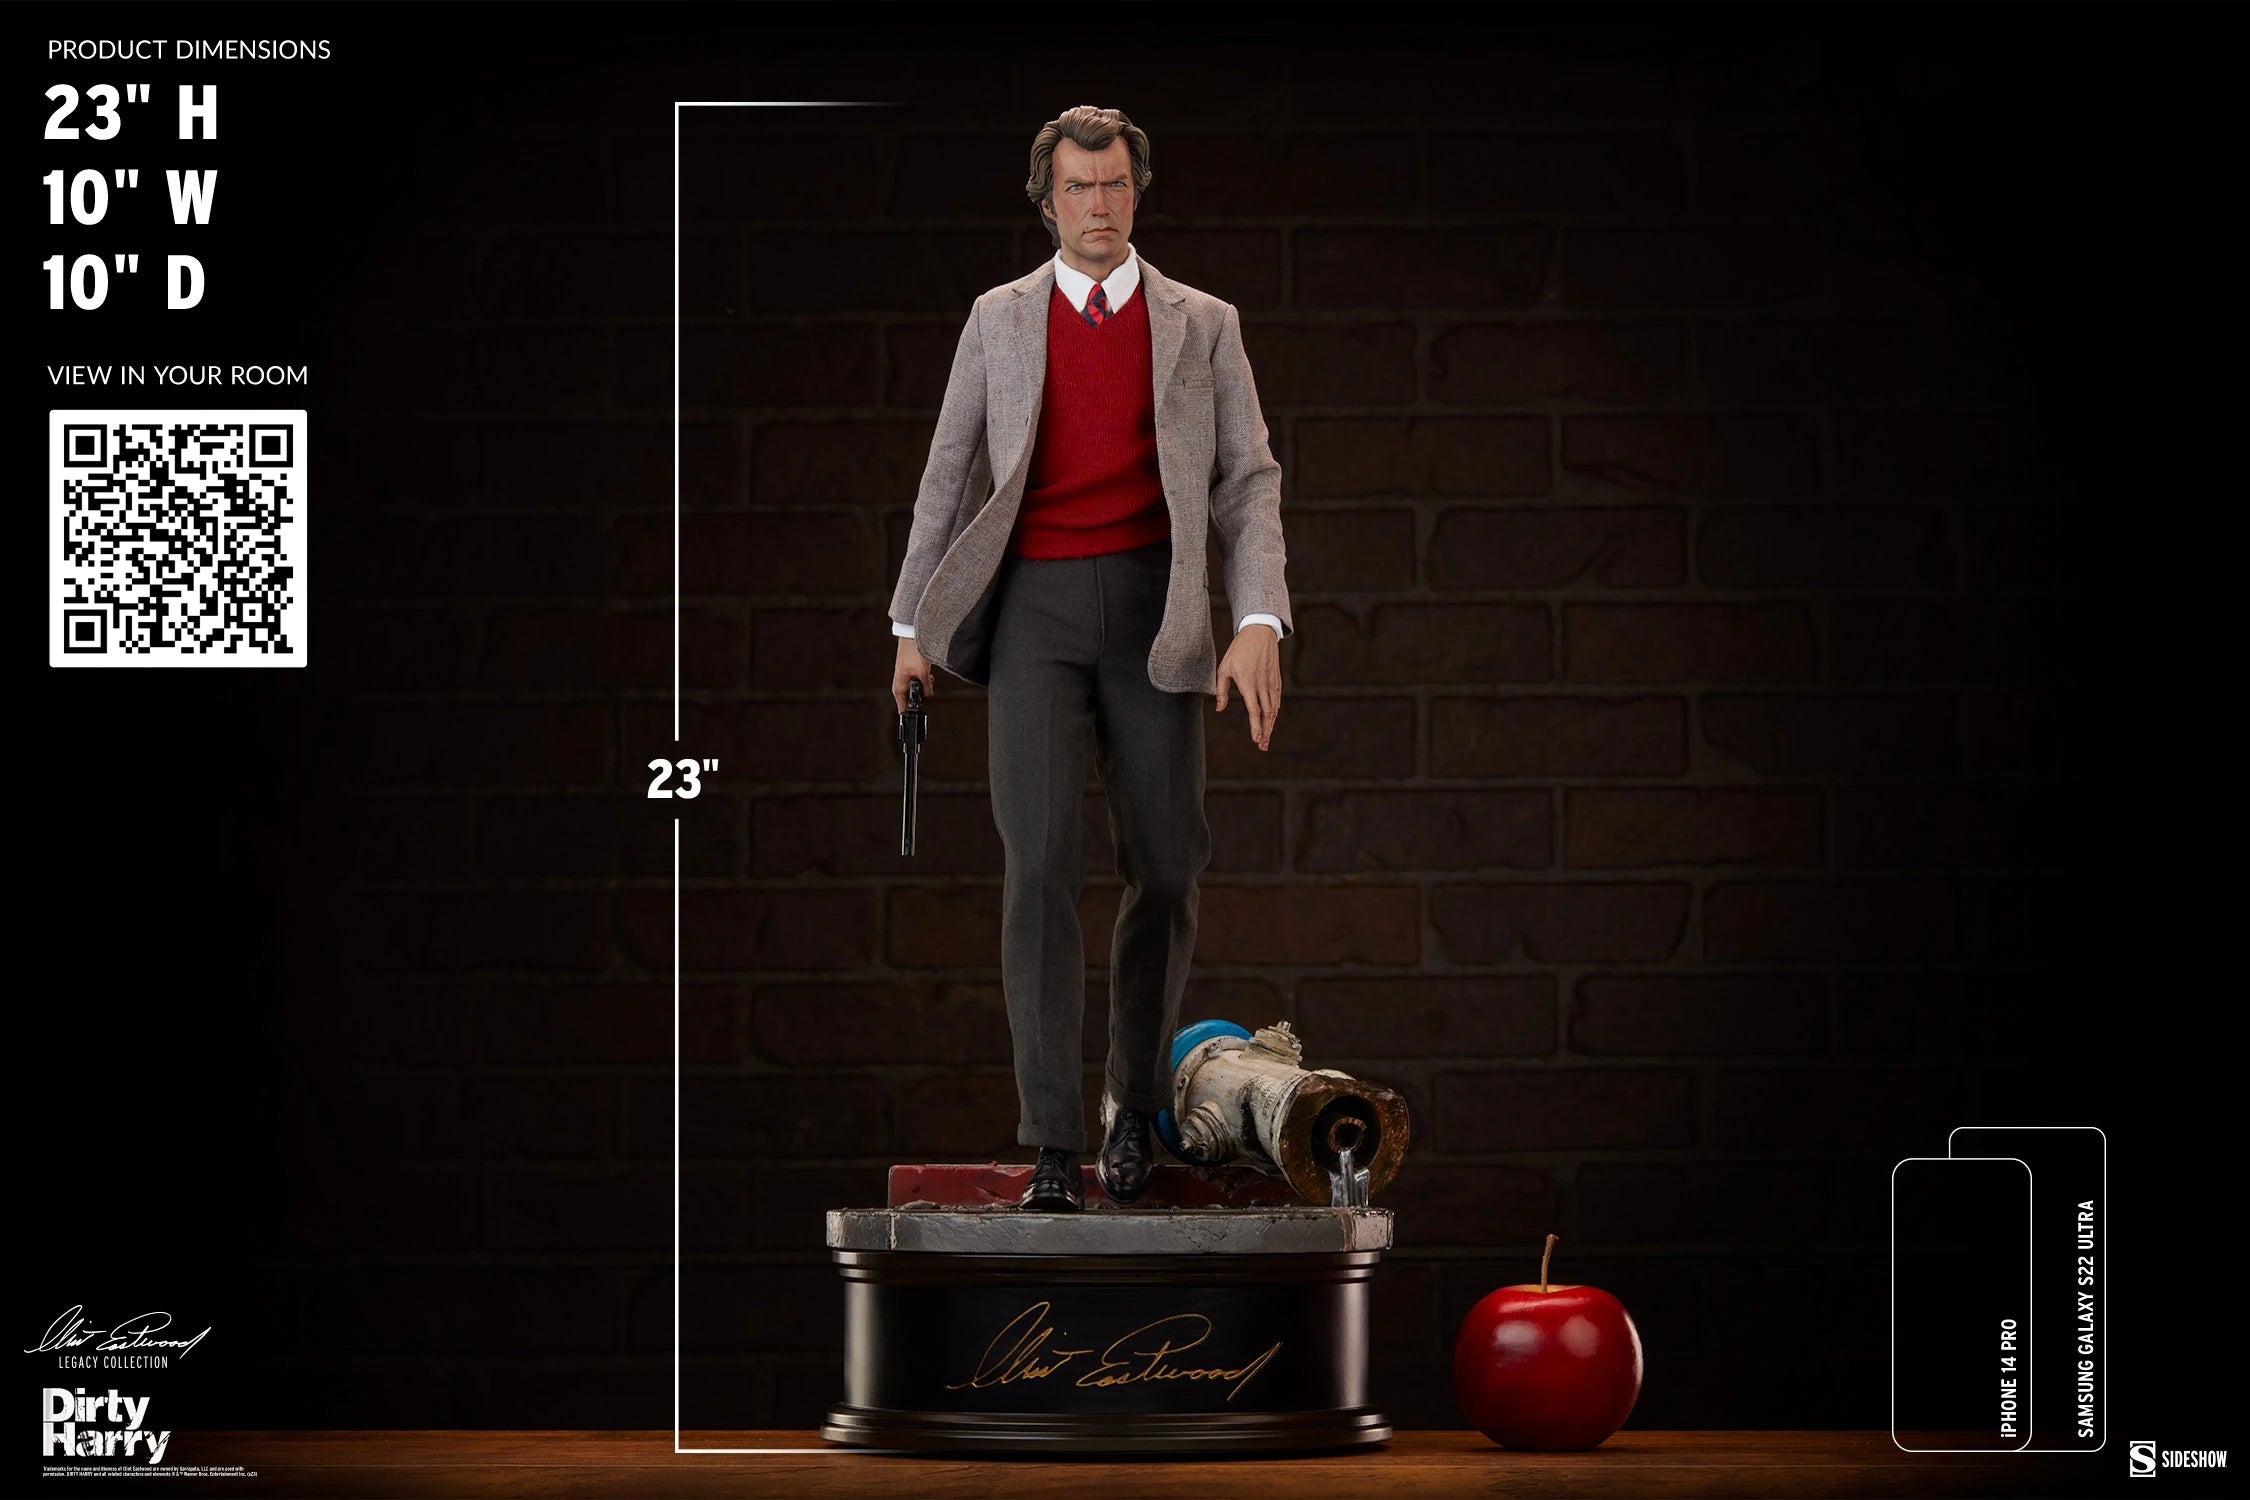 HARRY CALLAHAN Premium Format Figure by Sideshow Collectibles